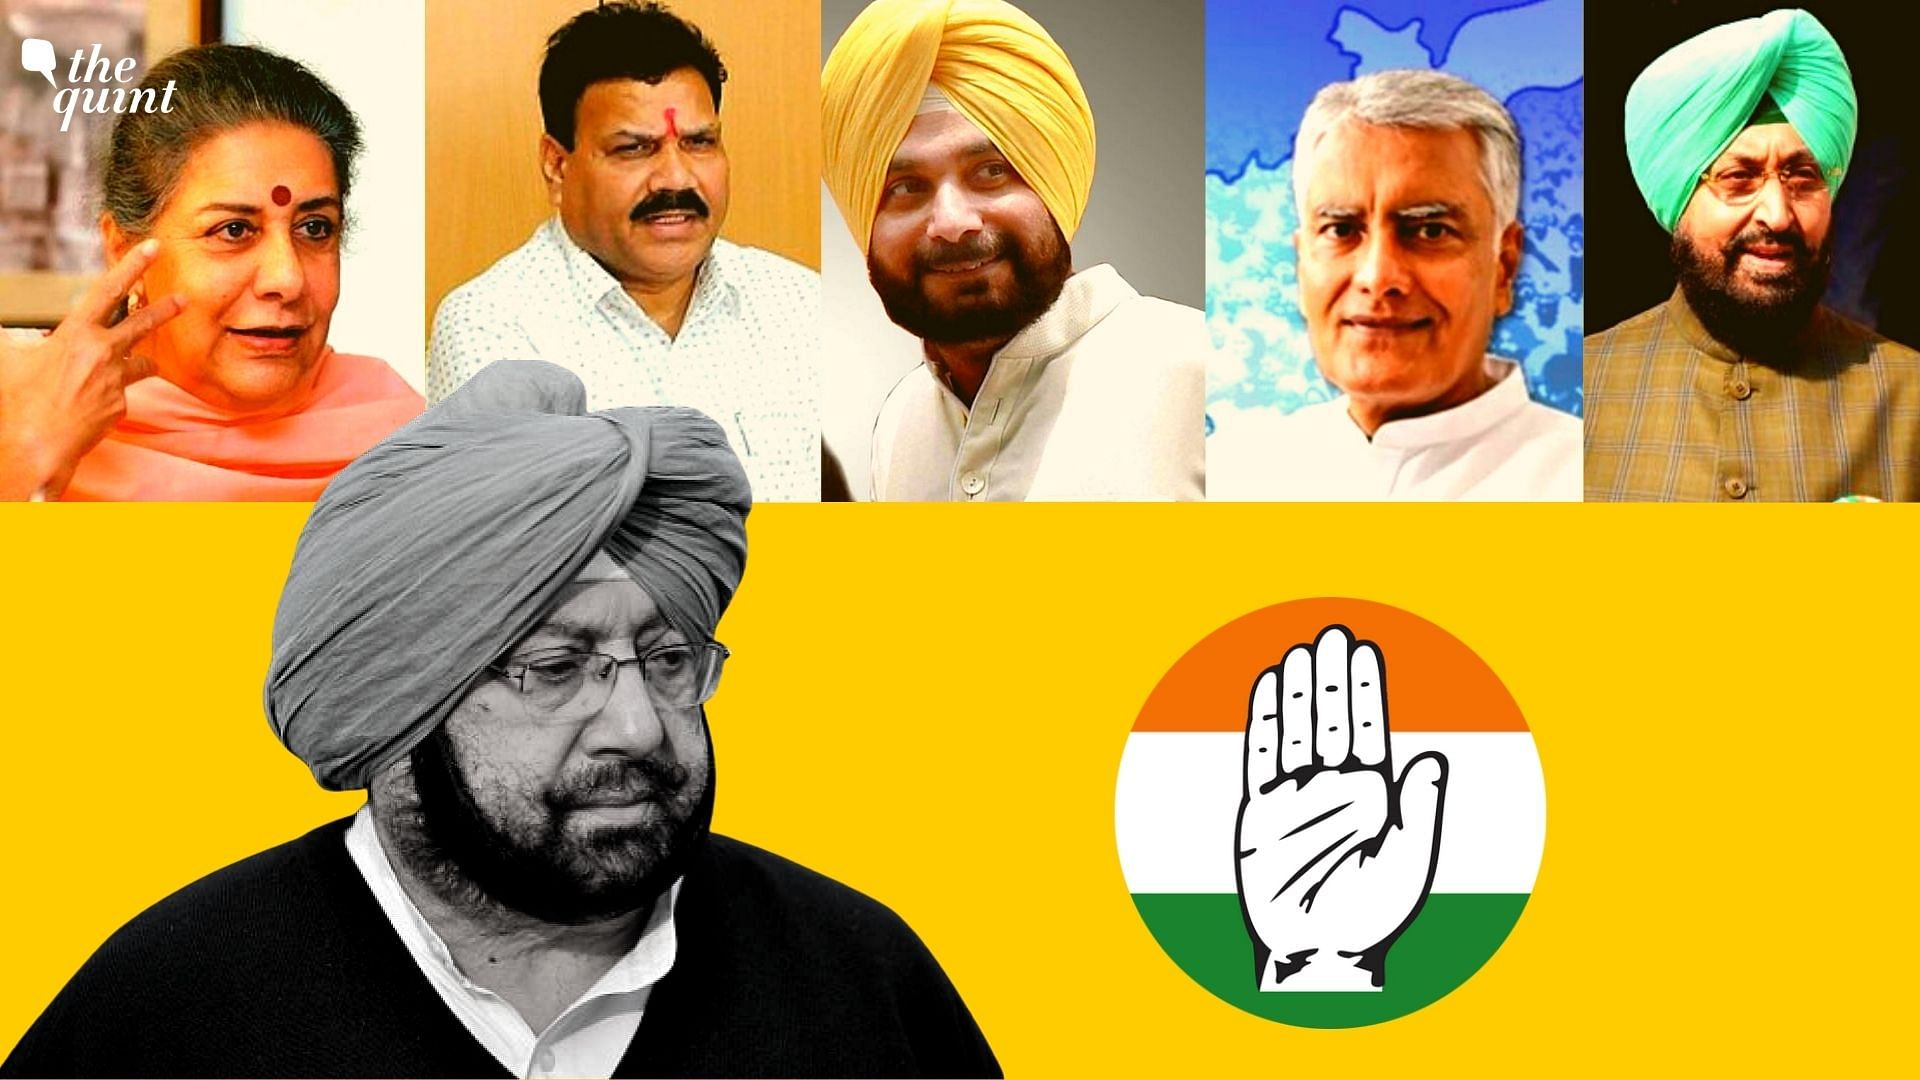 <div class="paragraphs"><p>But if Captain Amarinder Singh steps down, who is likely to take his place as the Chief Minister of Punjab?</p></div>